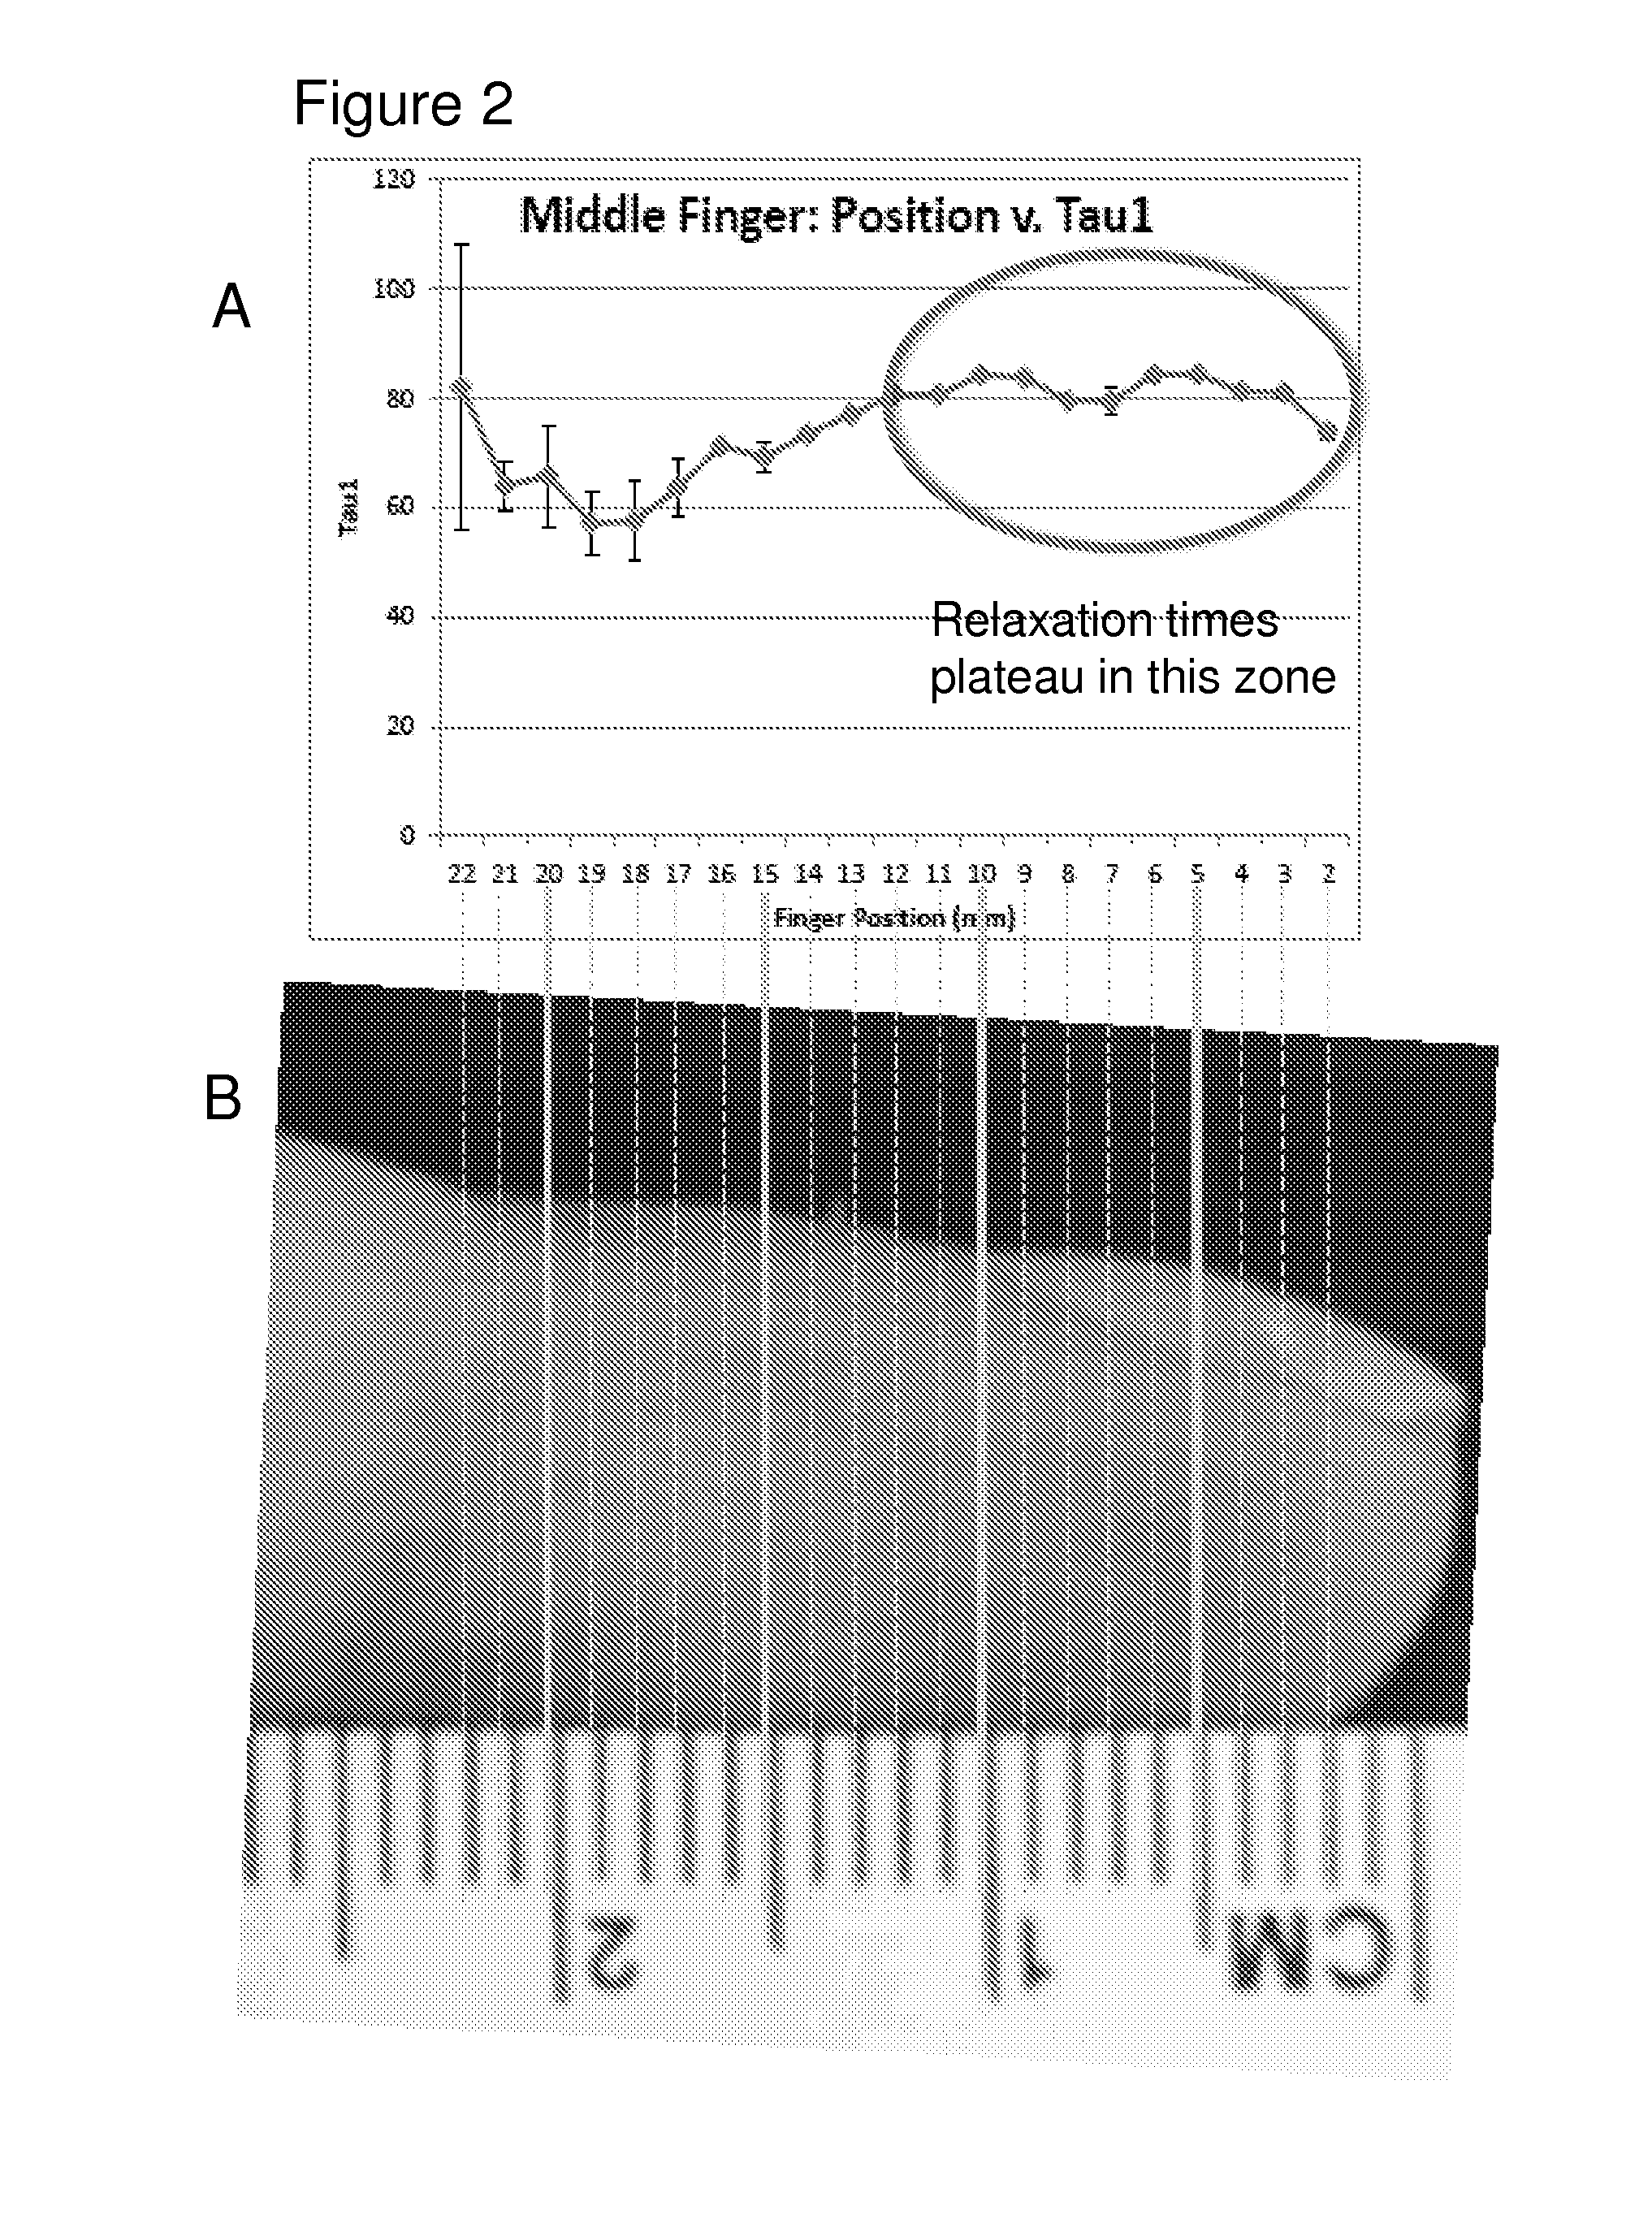 Nmr sensor and methods for rapid, non-invasive determination of hydration state or vascular volume of a subject